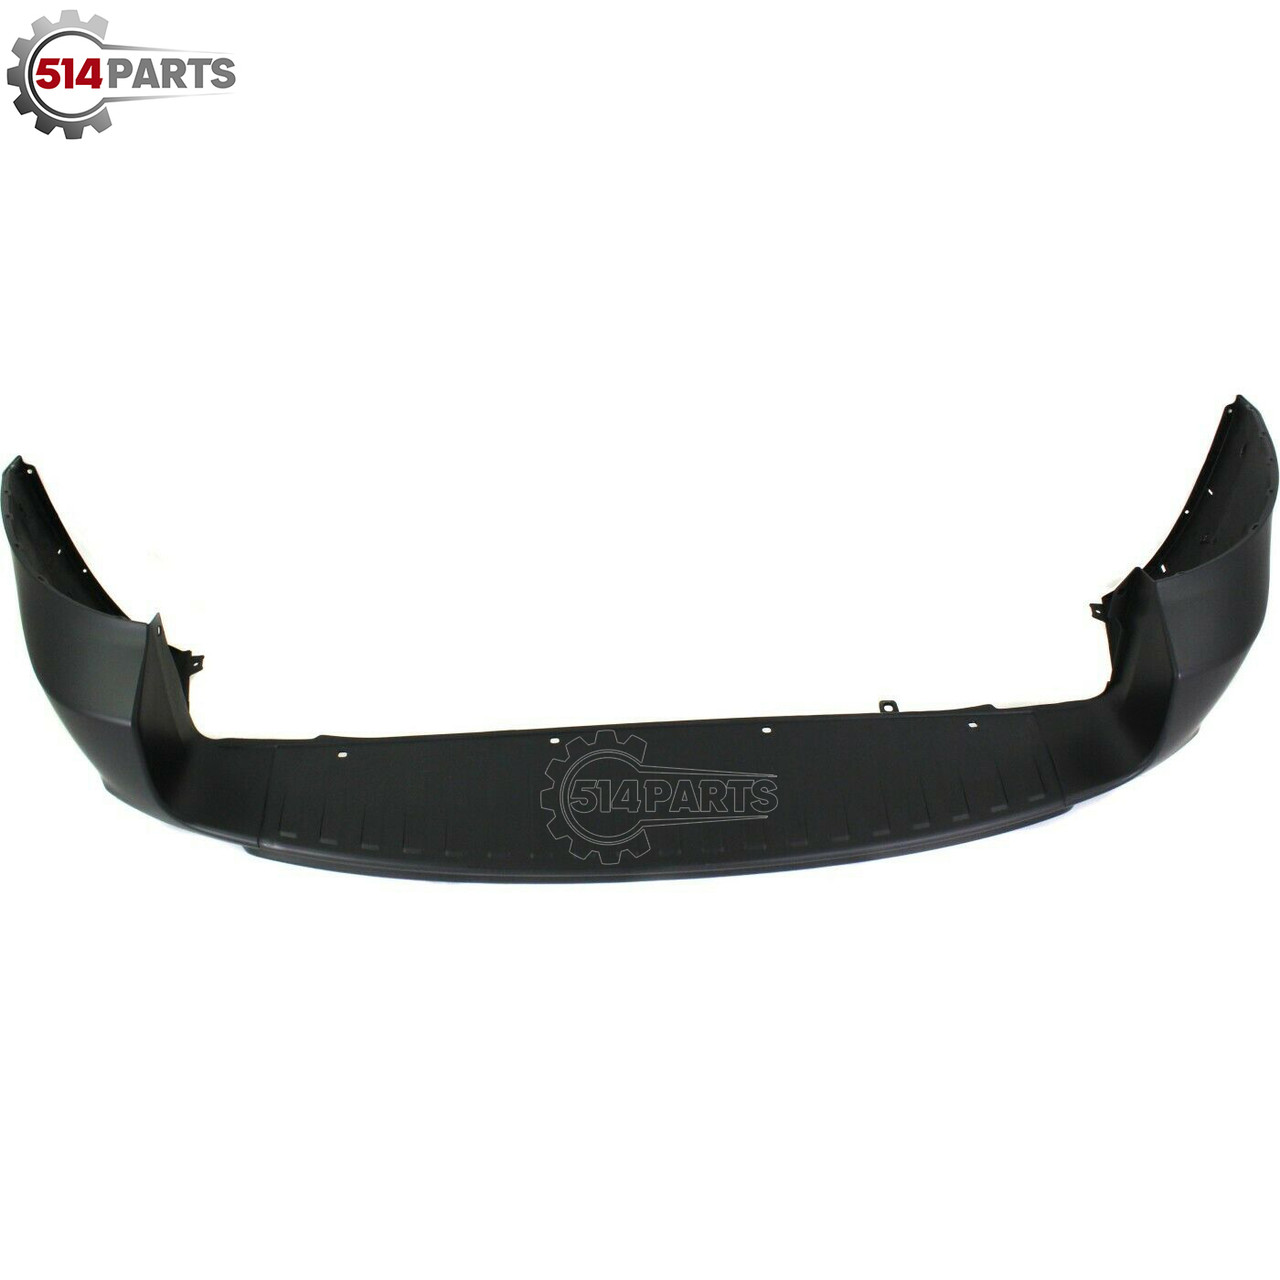 2009 - 2012 TOYOTA RAV4 with FLARE HOLE PRIMED REAR BUMPER COVER with RR GATE MOUNTED SPARE TIRE - PARE-CHOC ARRIER PRIME